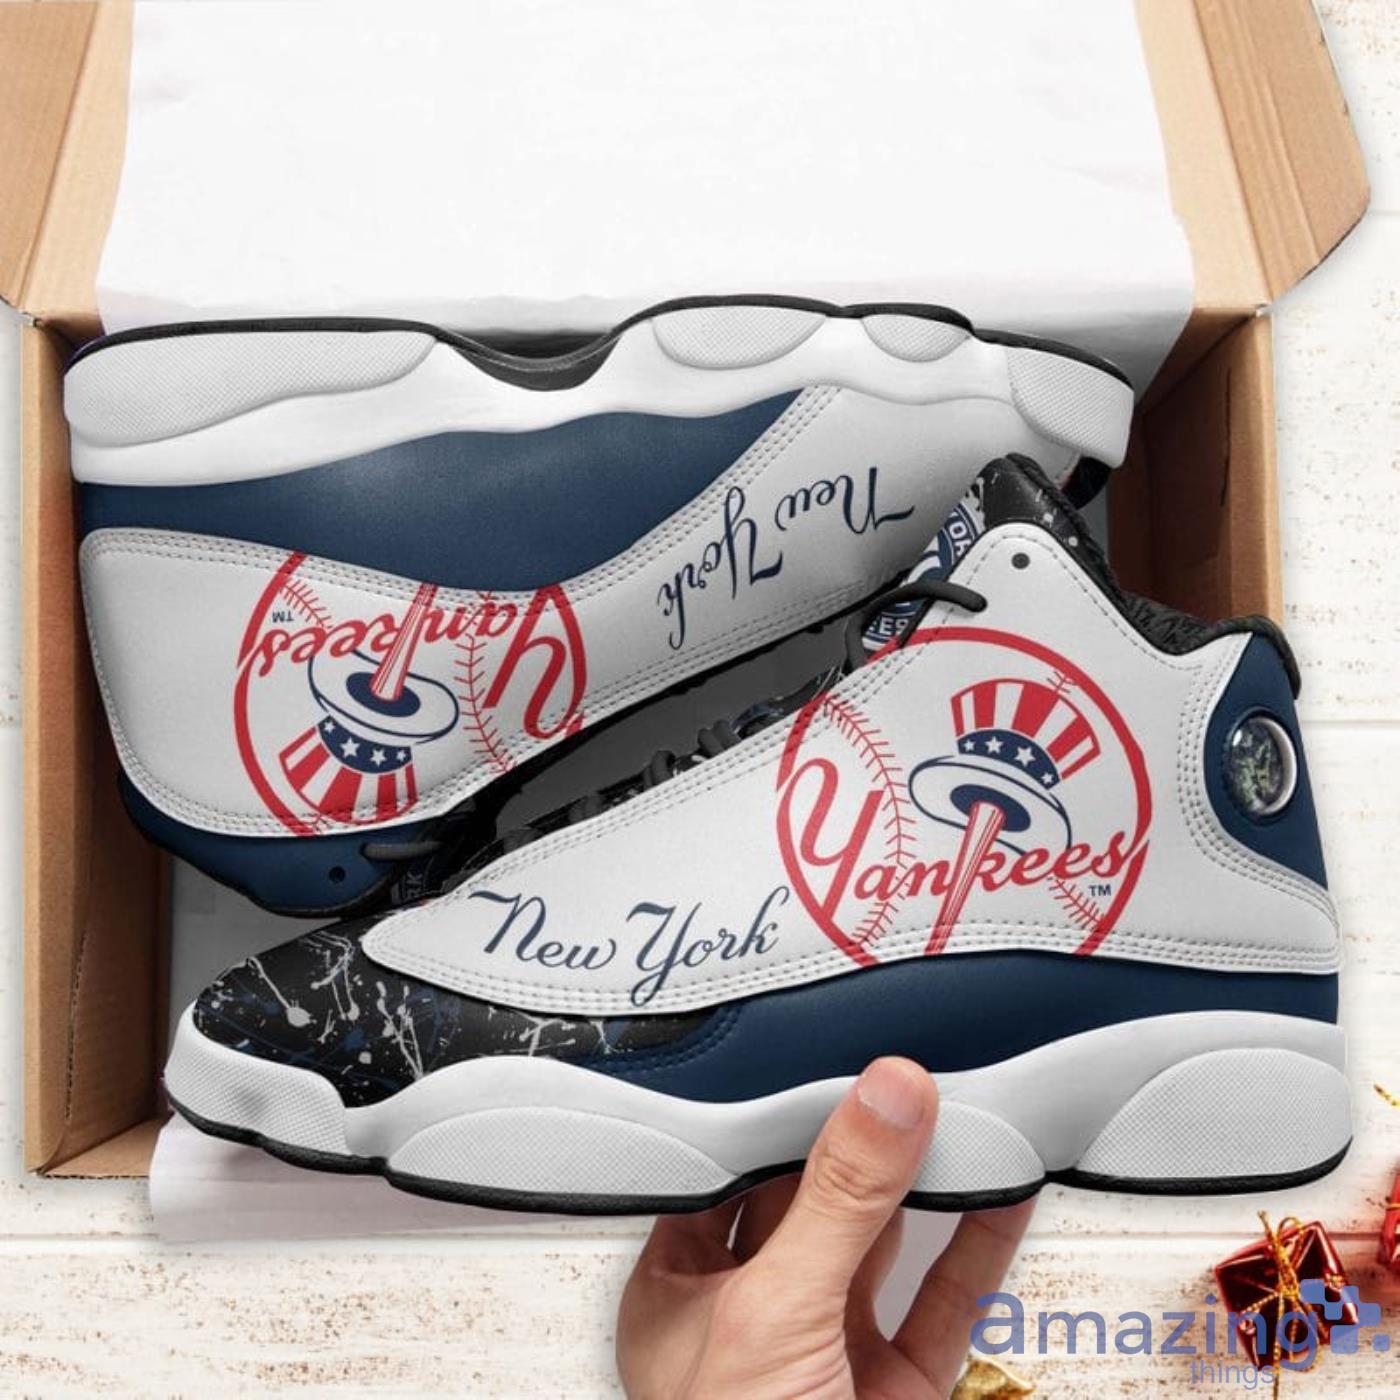 Mlb York Yankees Limited Edition Air Jordan 13 Shoes For Fans